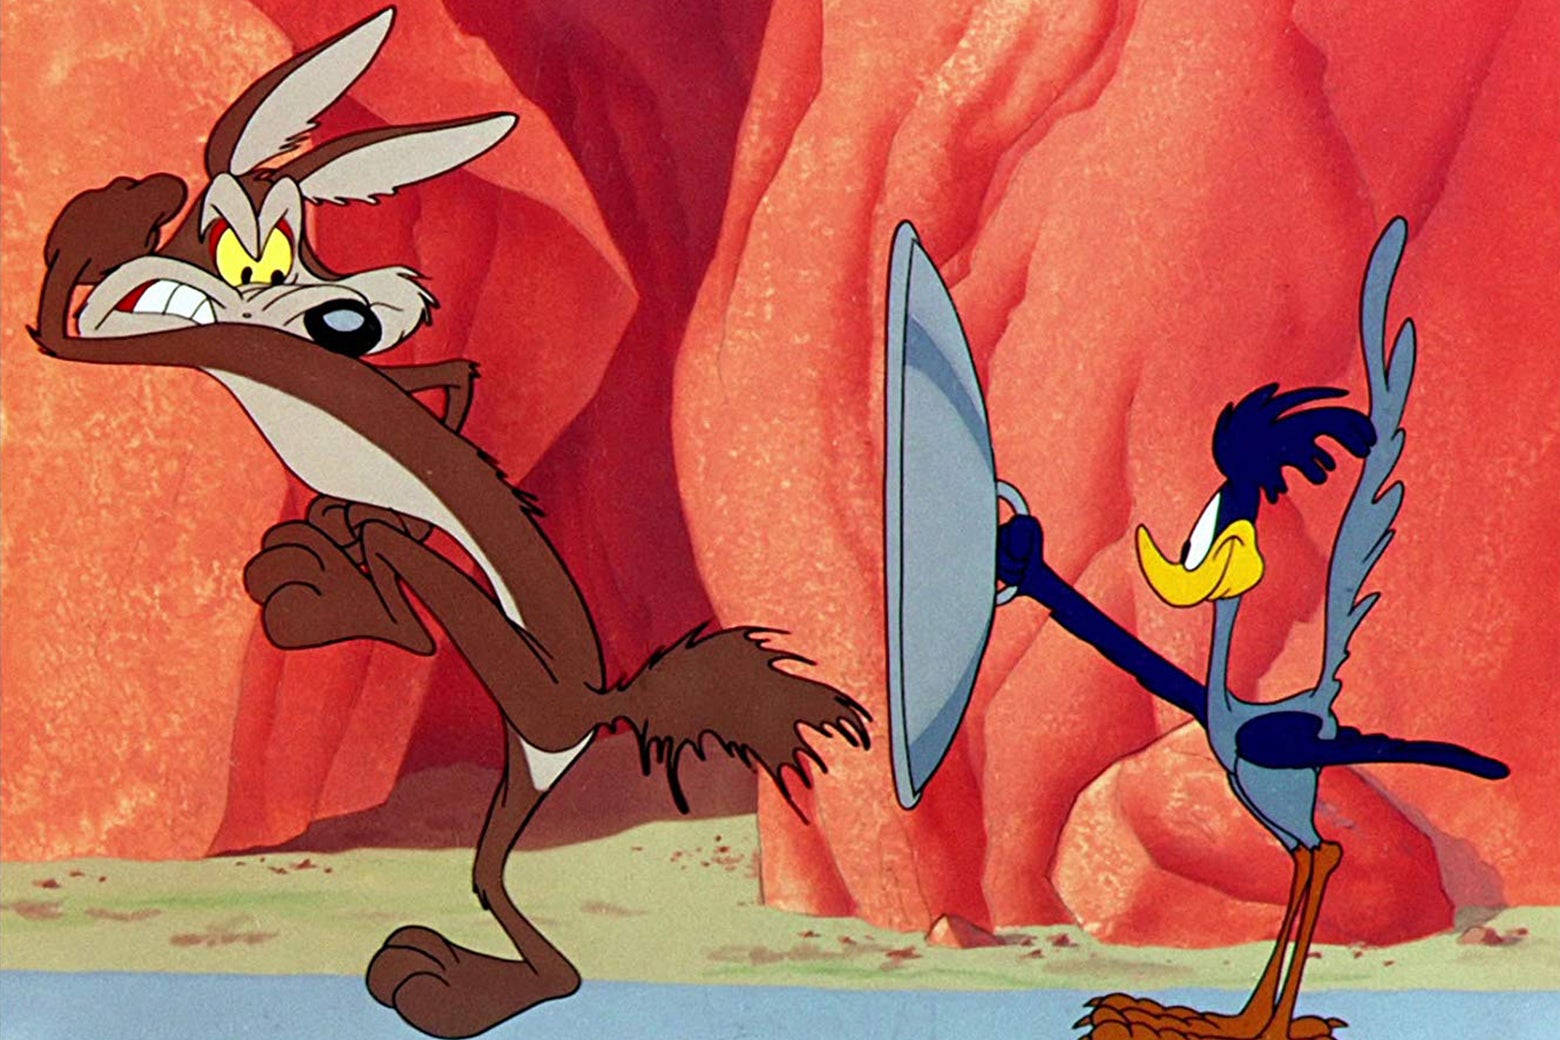 Warner Bros. has ordered a Wile E. Coyote movie, possibly from Acme.